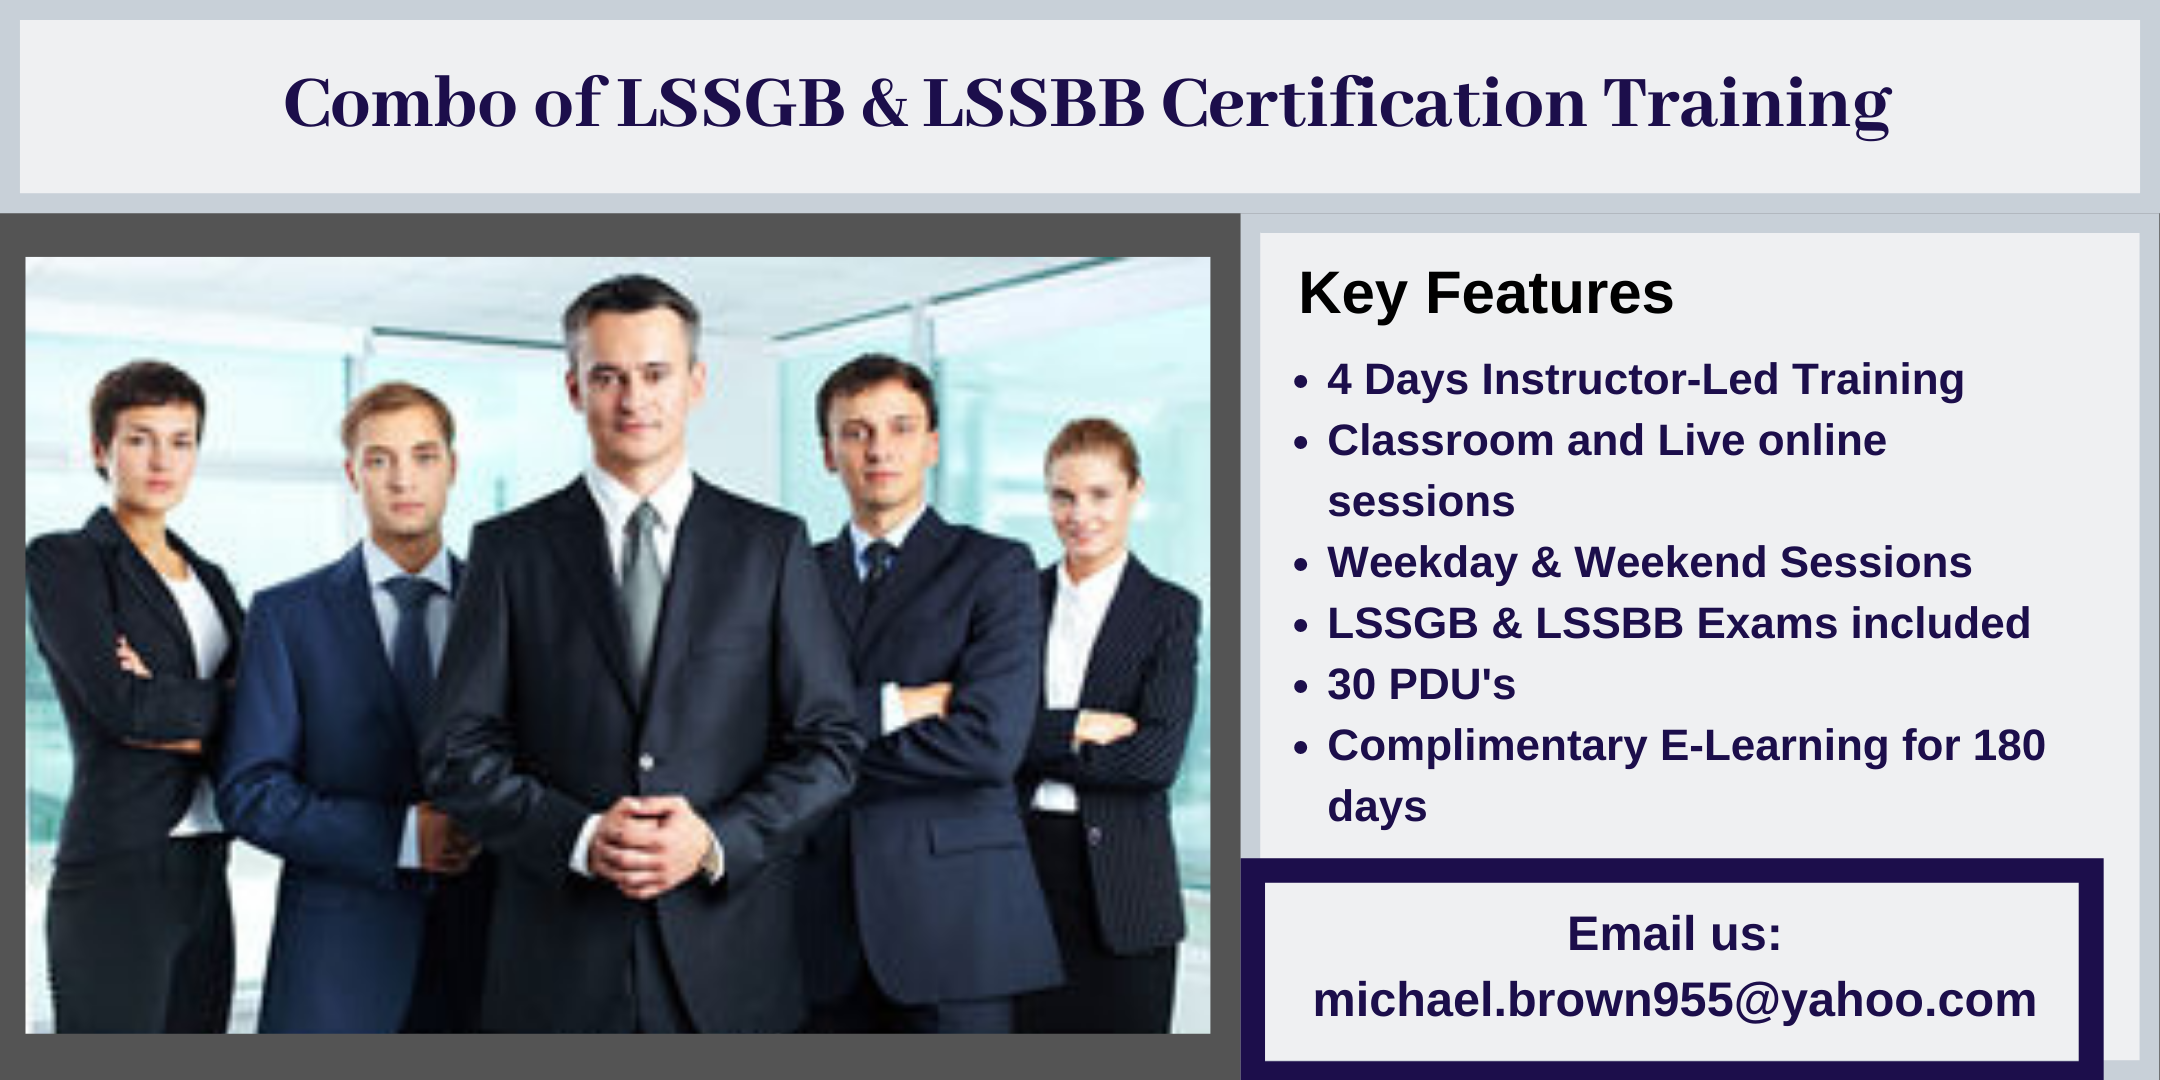 Combo of LSSGB & LSSBB 4 days Certification Training in Harbor City, CA